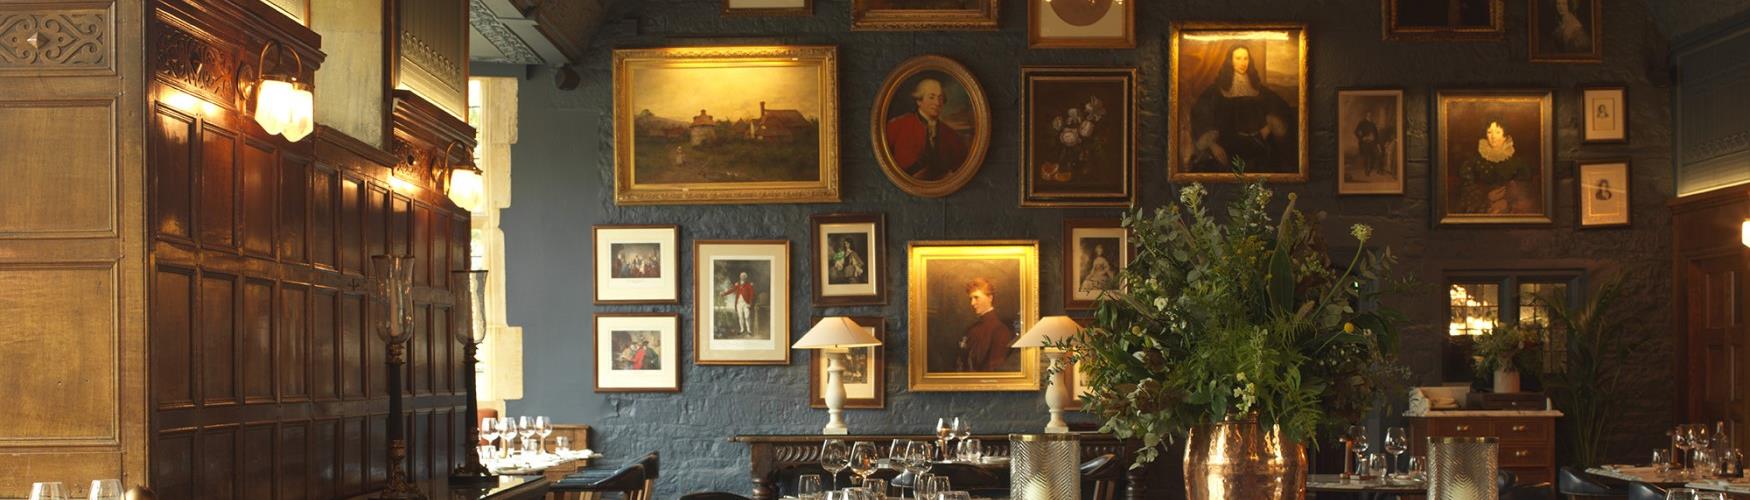 Interior of The Grill by James Martin at The Lygon Arms